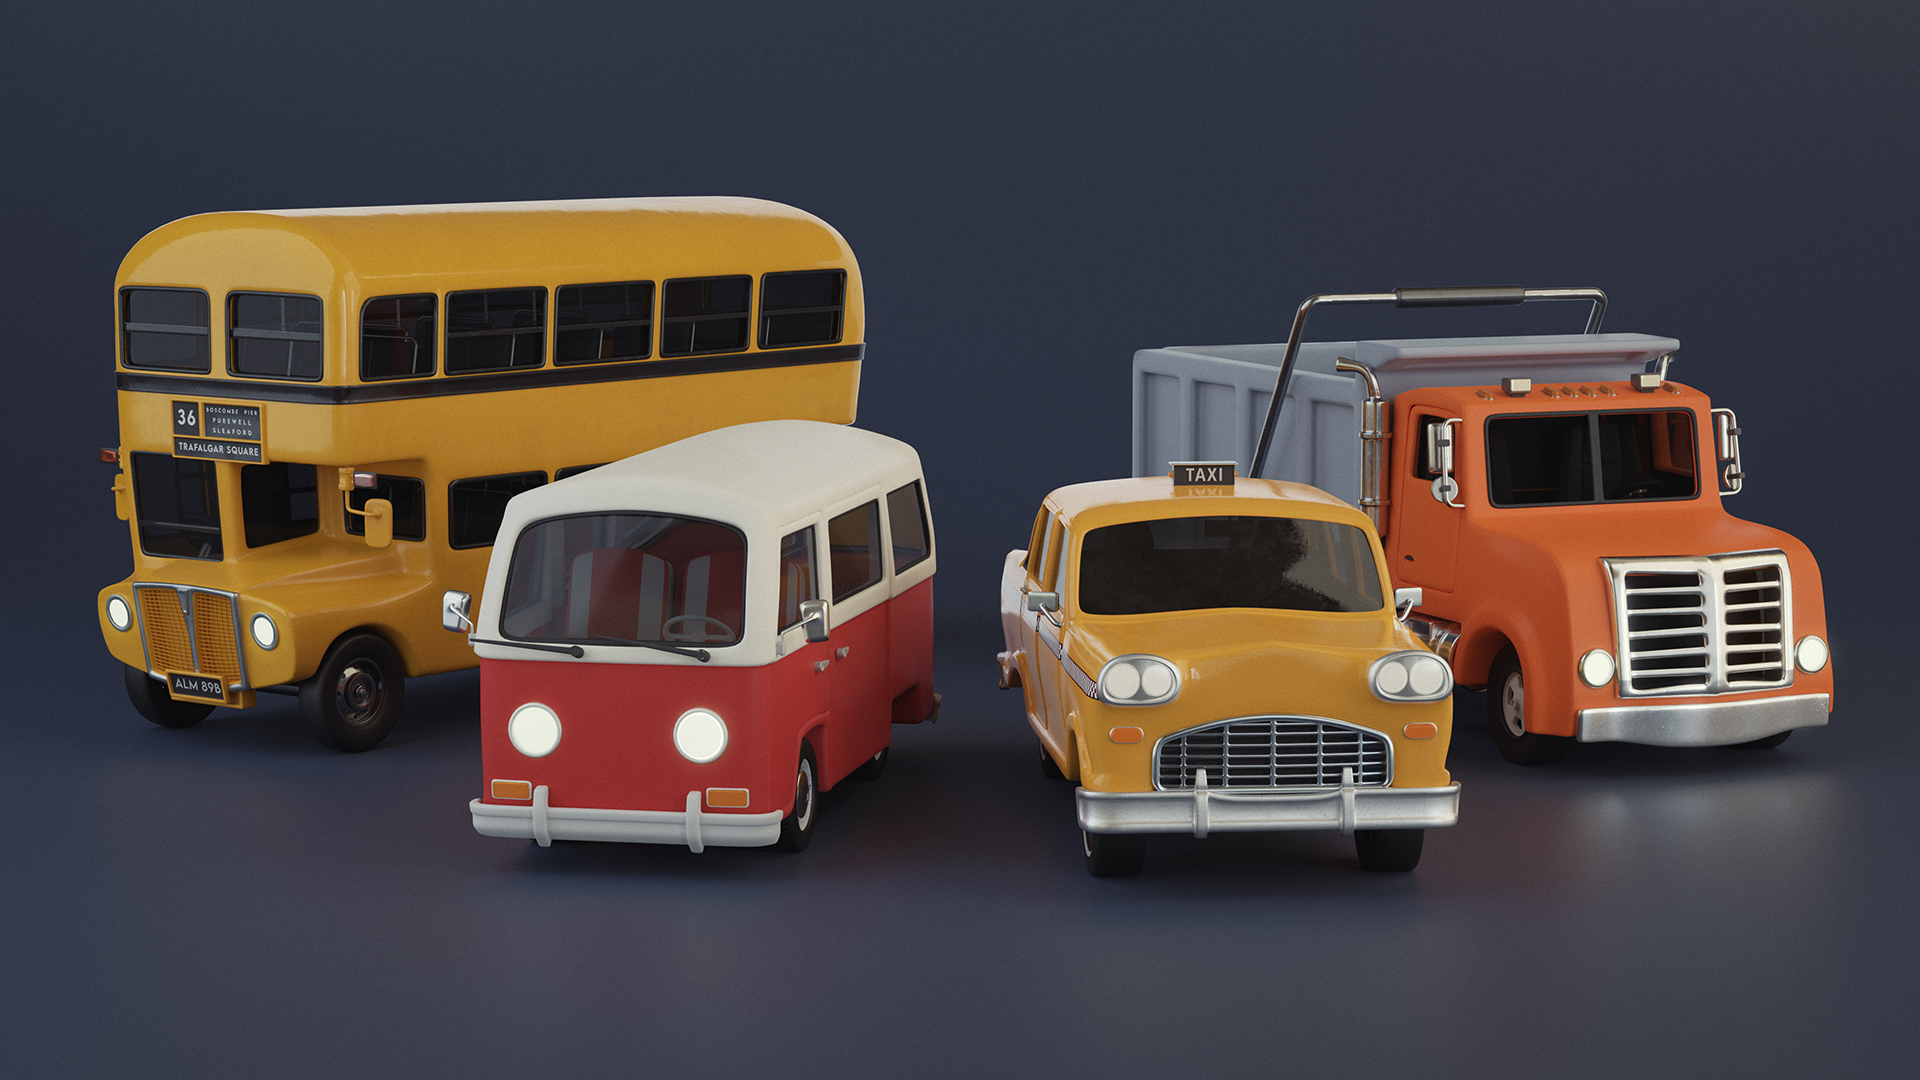 3D models of stylized vehicles created by Cratial 3D